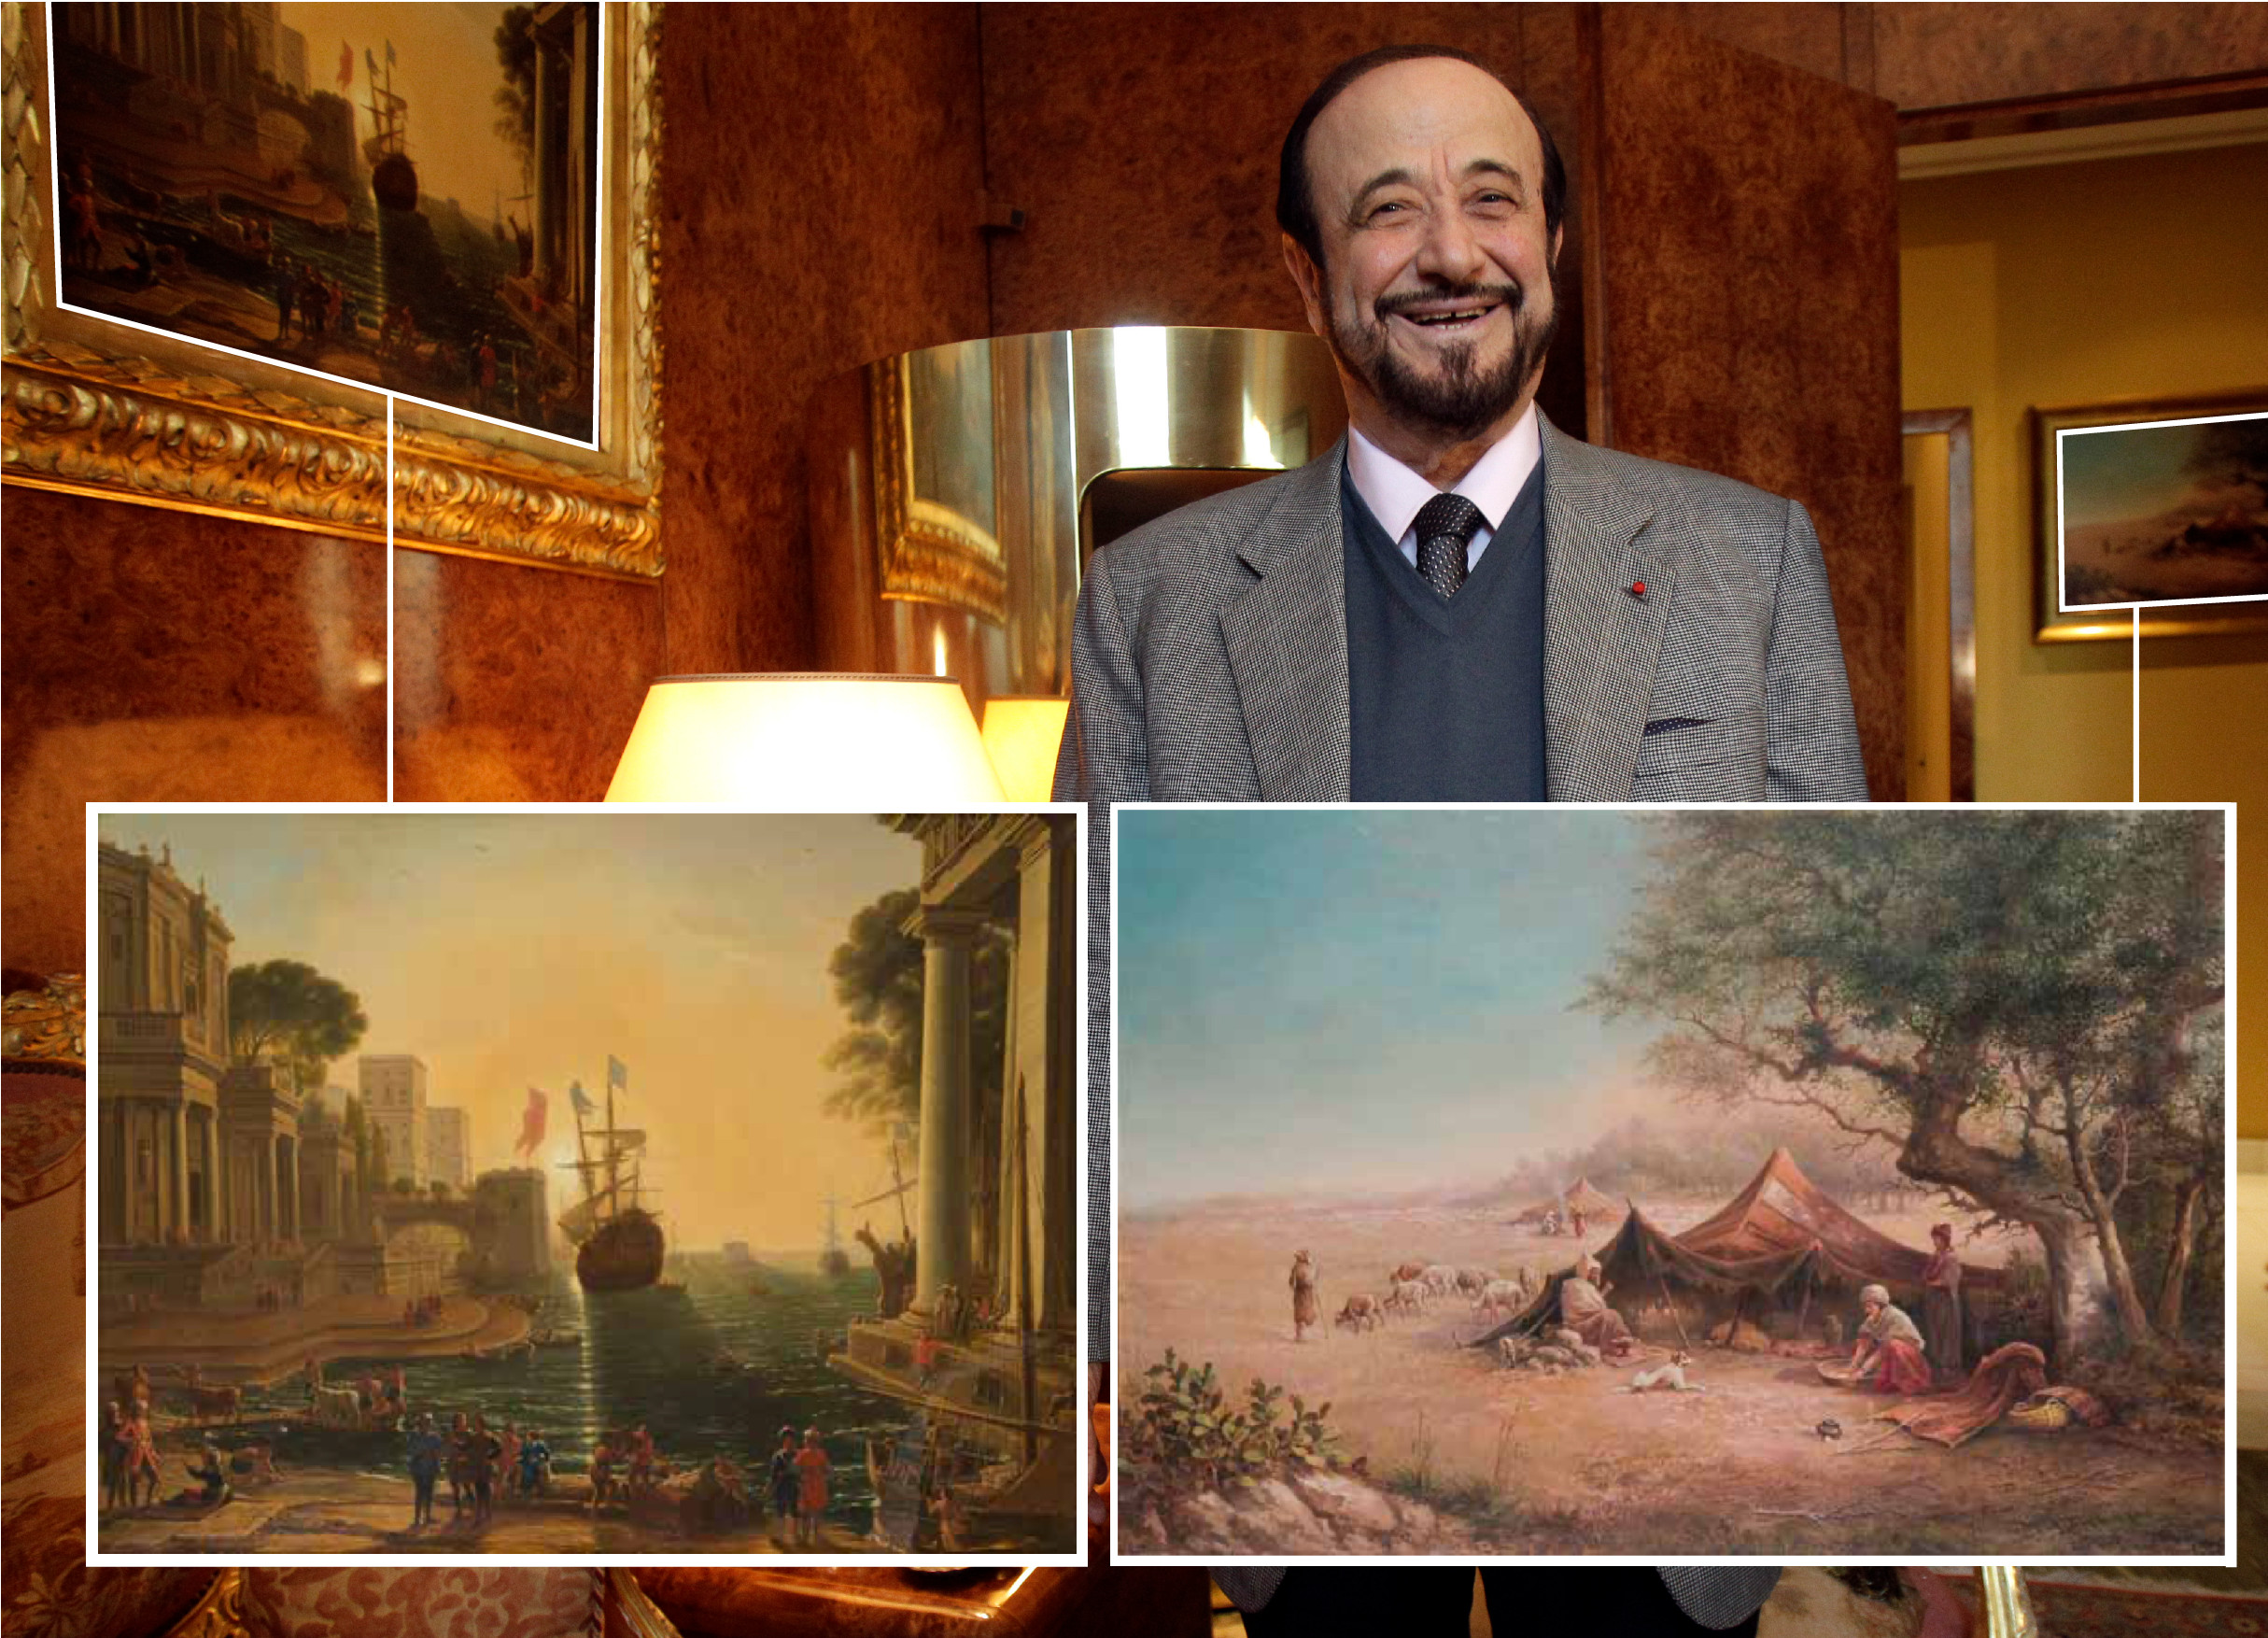 Rifaat al-Assad in his townhouse on Avenue Foch, Paris, in 2011, with two of the paintings - by De Toursky (R) and Gelee (L) - auctioned off by Ader. (Michel Euler/AP/SIPA/Ader screenshots)